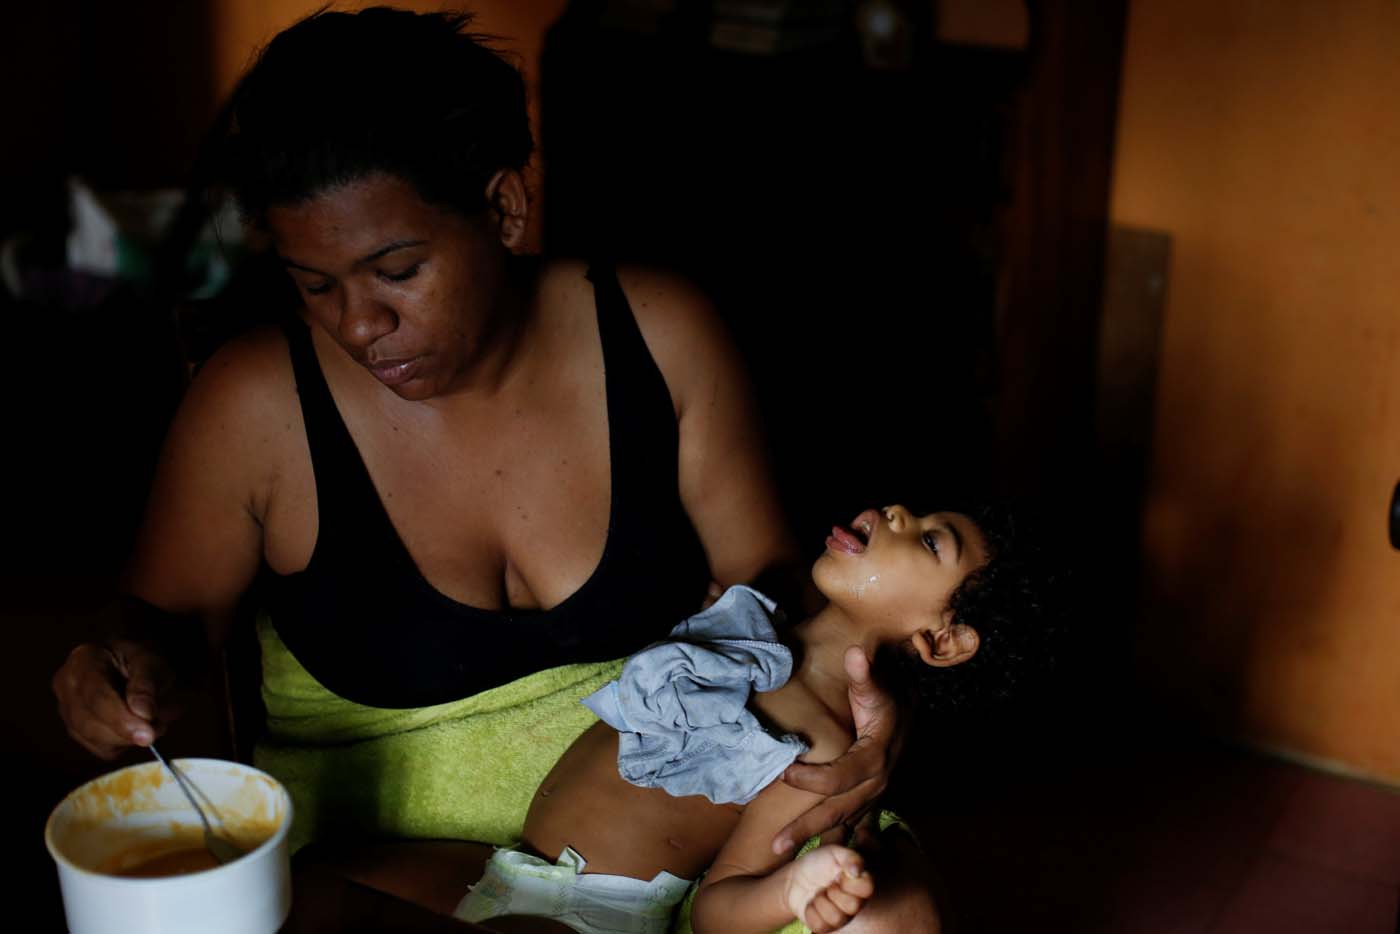 Tatiana Rocha feeds her son Kaleth Heredia, 2, neurological patient being treated with anticonvulsants, at their house in Caracas, Venezuela February 3, 2017. REUTERS/Carlos Garcia Rawlins    SEARCH "EPILEPSY CARACAS" FOR THIS STORY. SEARCH "WIDER IMAGE" FOR ALL STORIES.